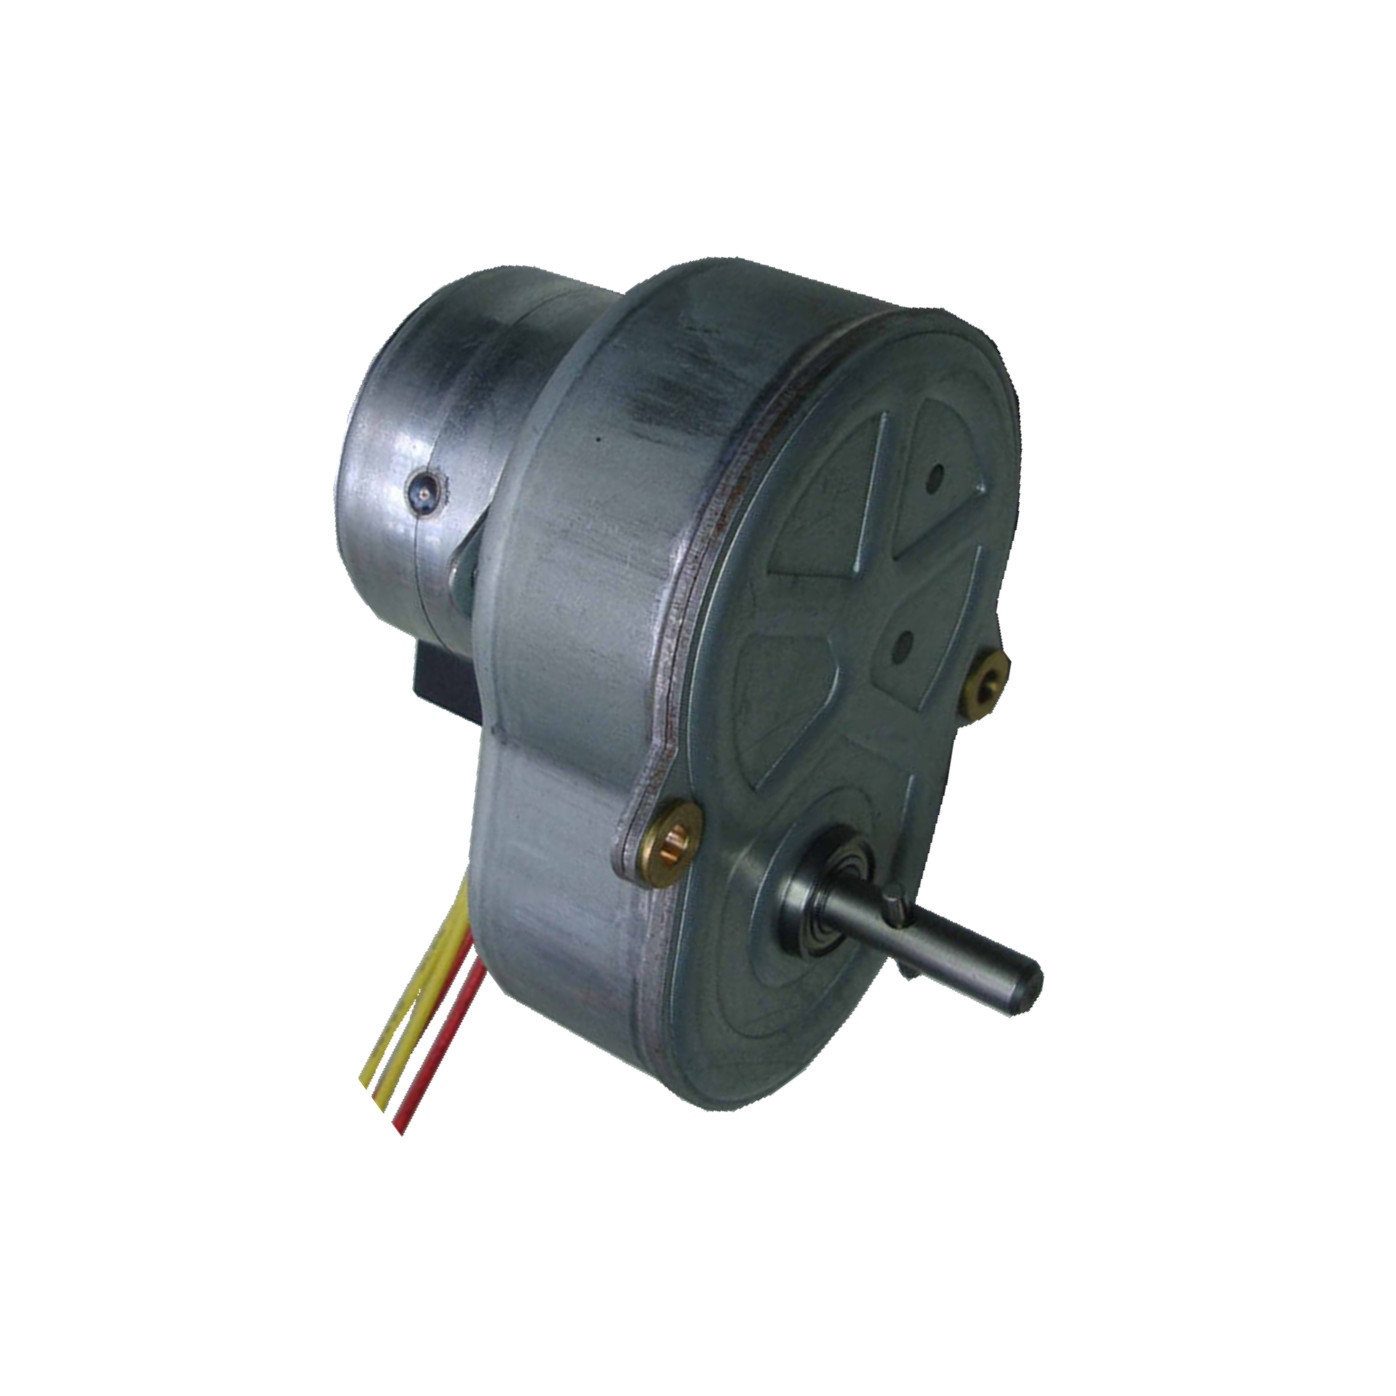 Pear Stepping 12 Volt Brushless BLDC Gear Motor With Gearbox